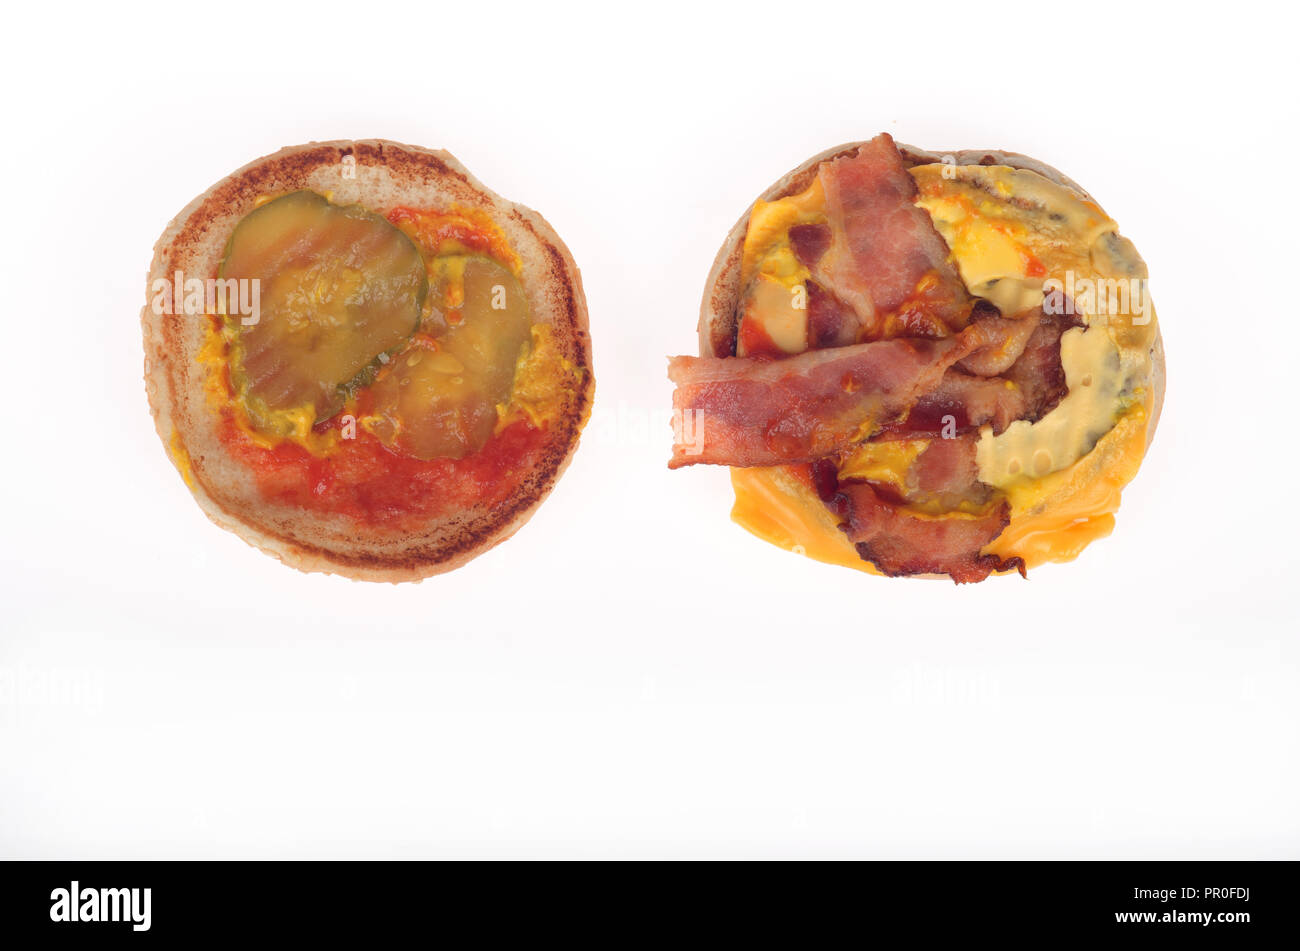 Open bacon cheeseburger showing strips of bacon, yellow american cheese, pickles, ketchup and mustard on bun Stock Photo